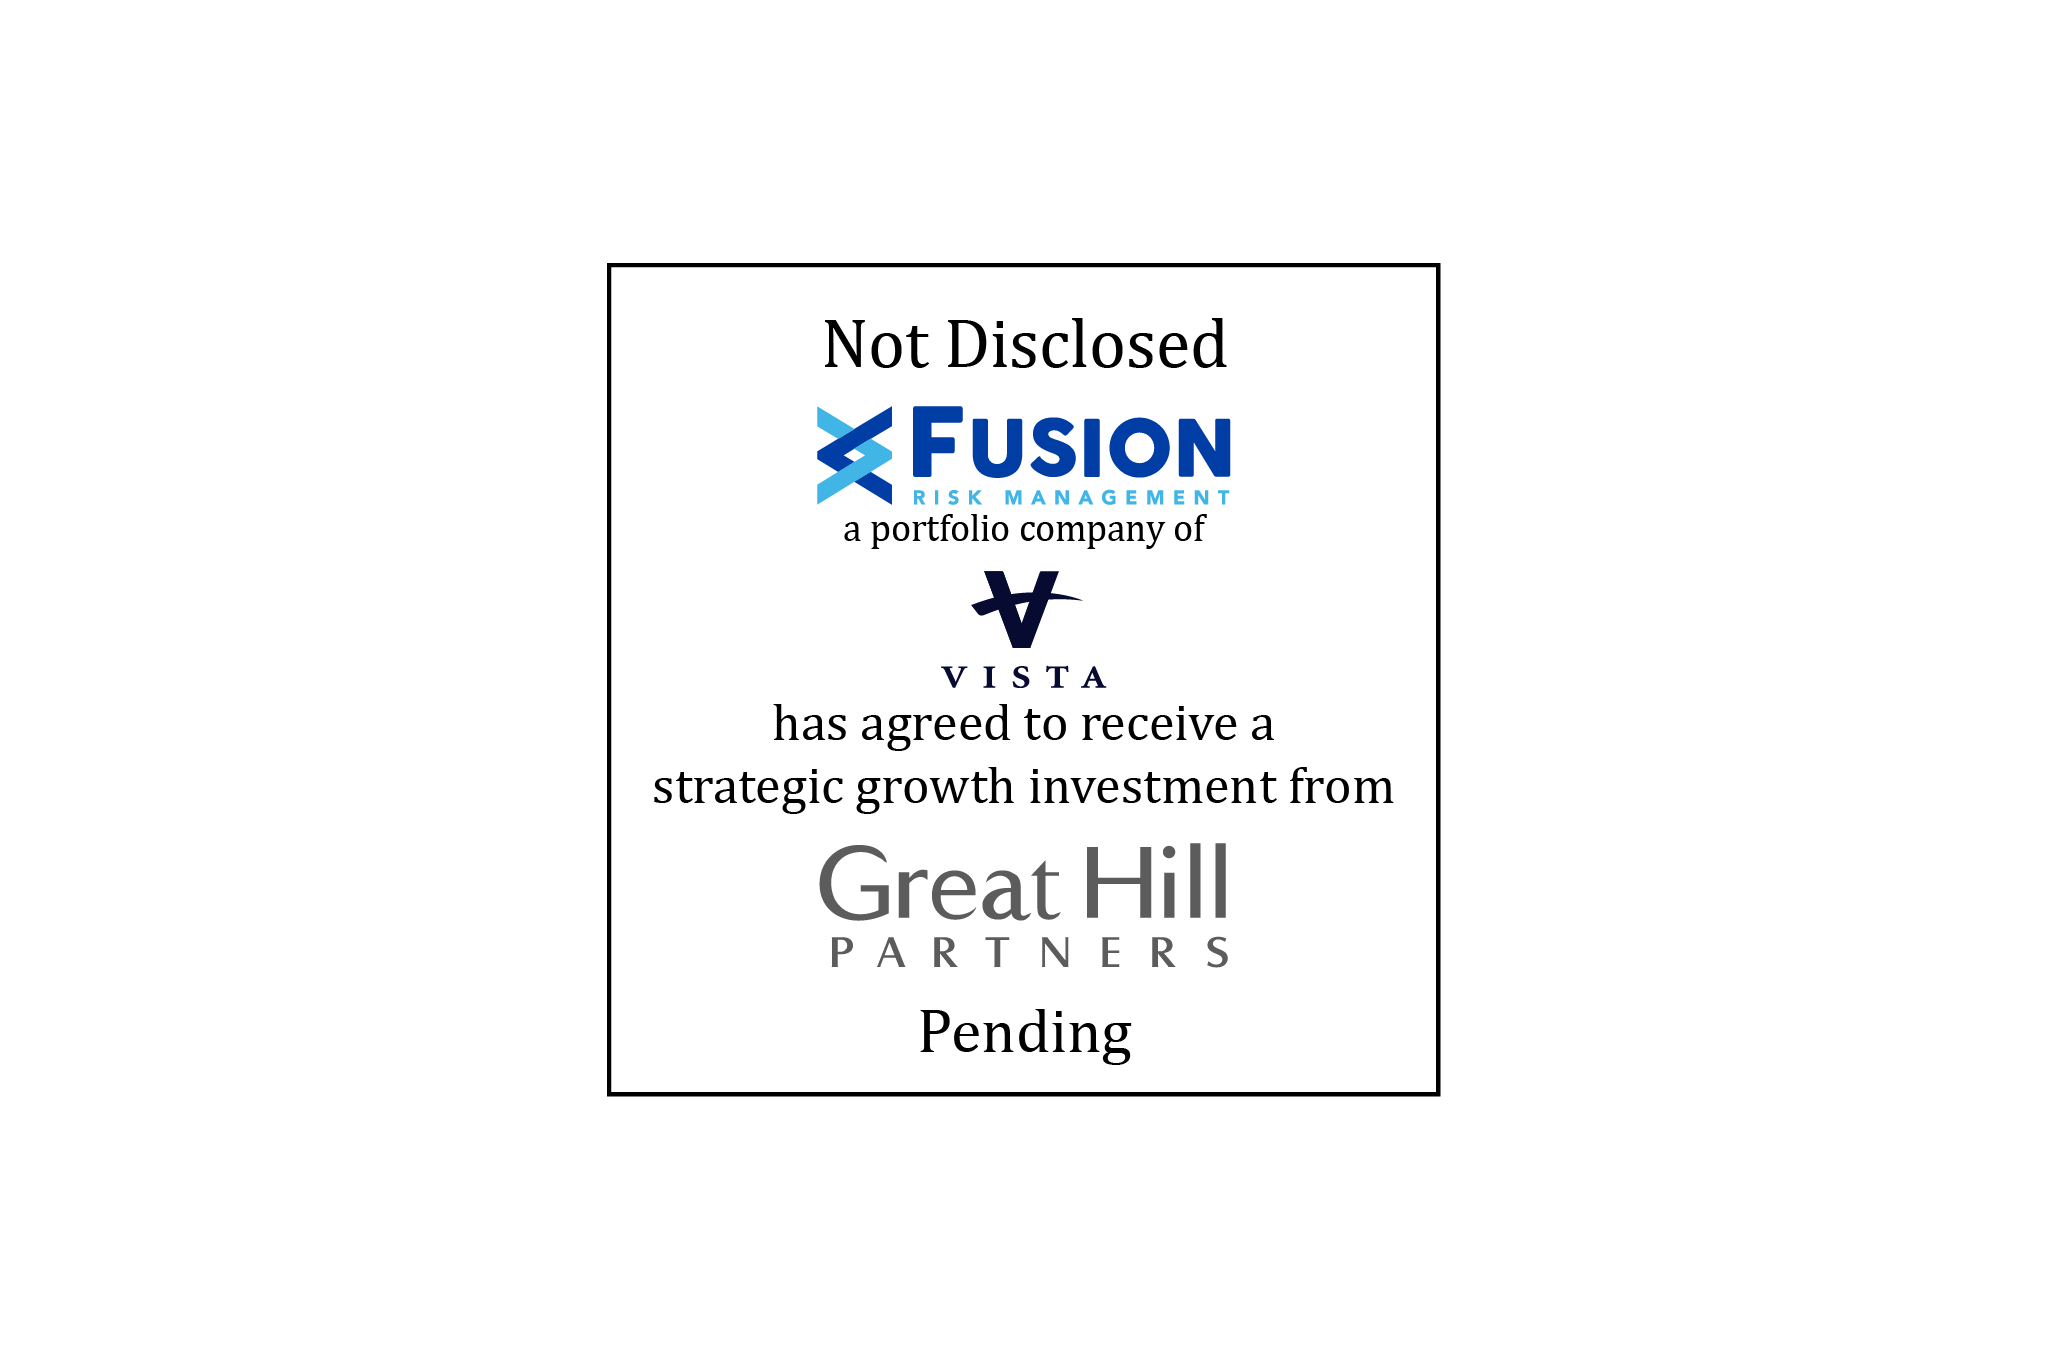 Not Disclosed | Fusion Risk Management (logo), a portfolio company of Vista Equity Partners, has agreed to receive a strategic growth investment from Great Hill Partners (logo) | Pending